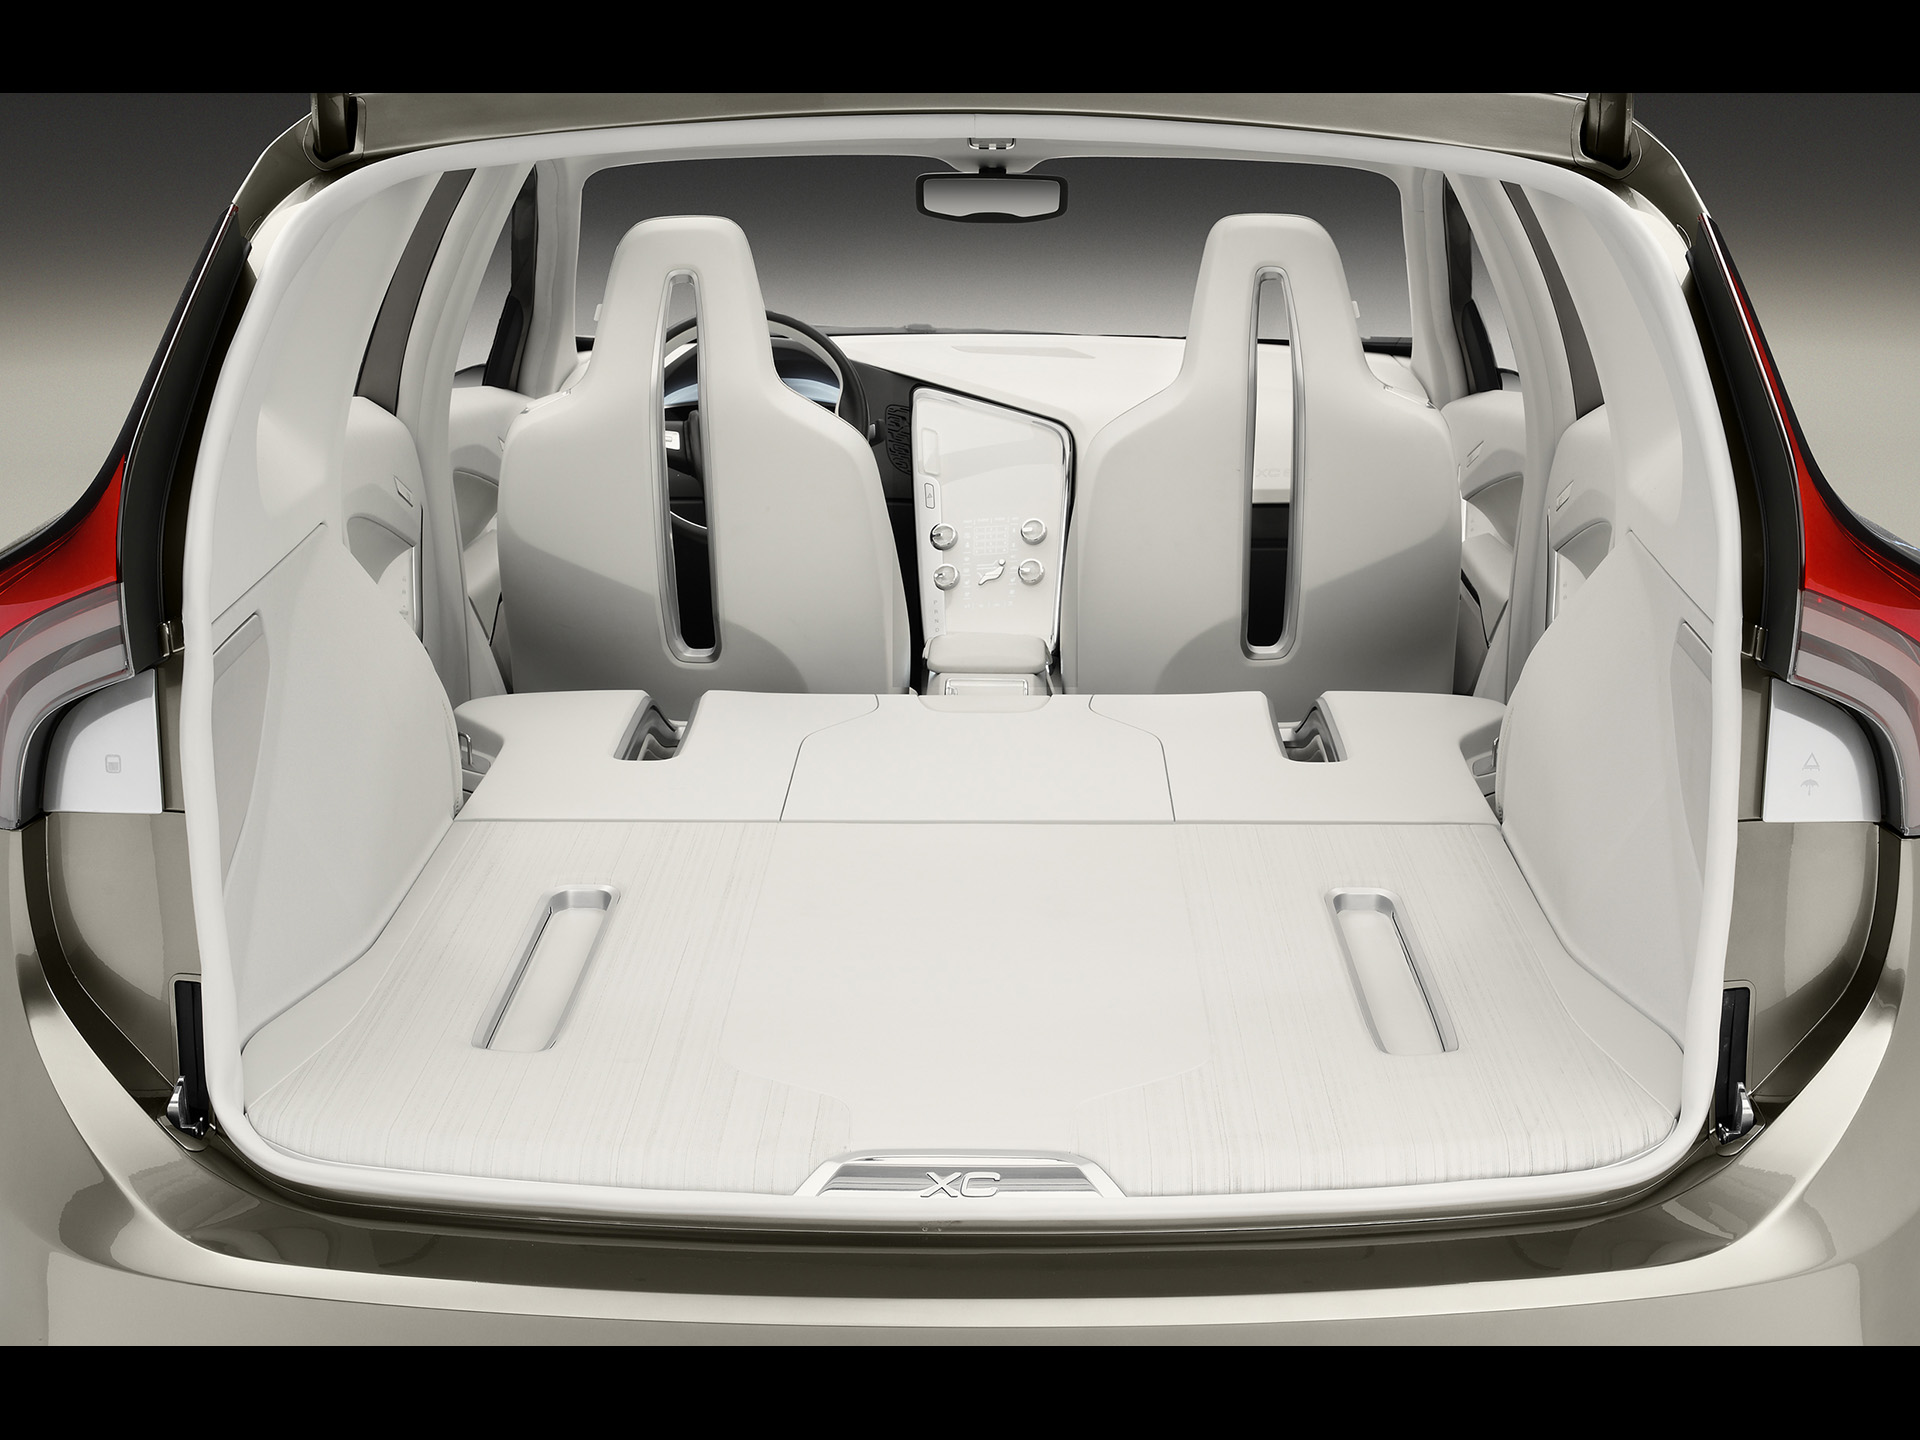 2007 Volvo XC60 Concept - Flat Floor Cargo Space With Folded Rear Seat